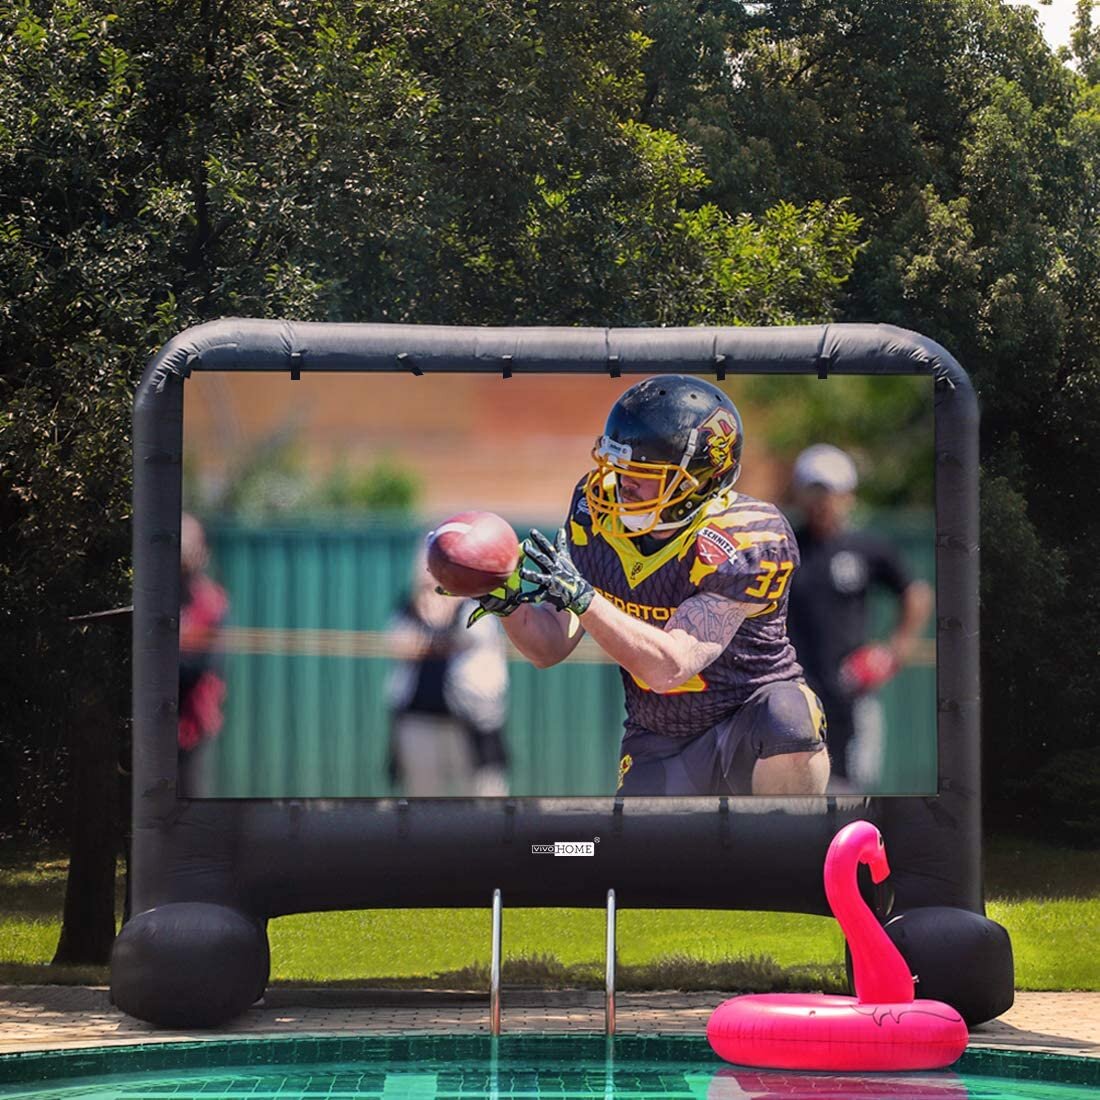 16ft Inflatable Blowup Screen with projector $175